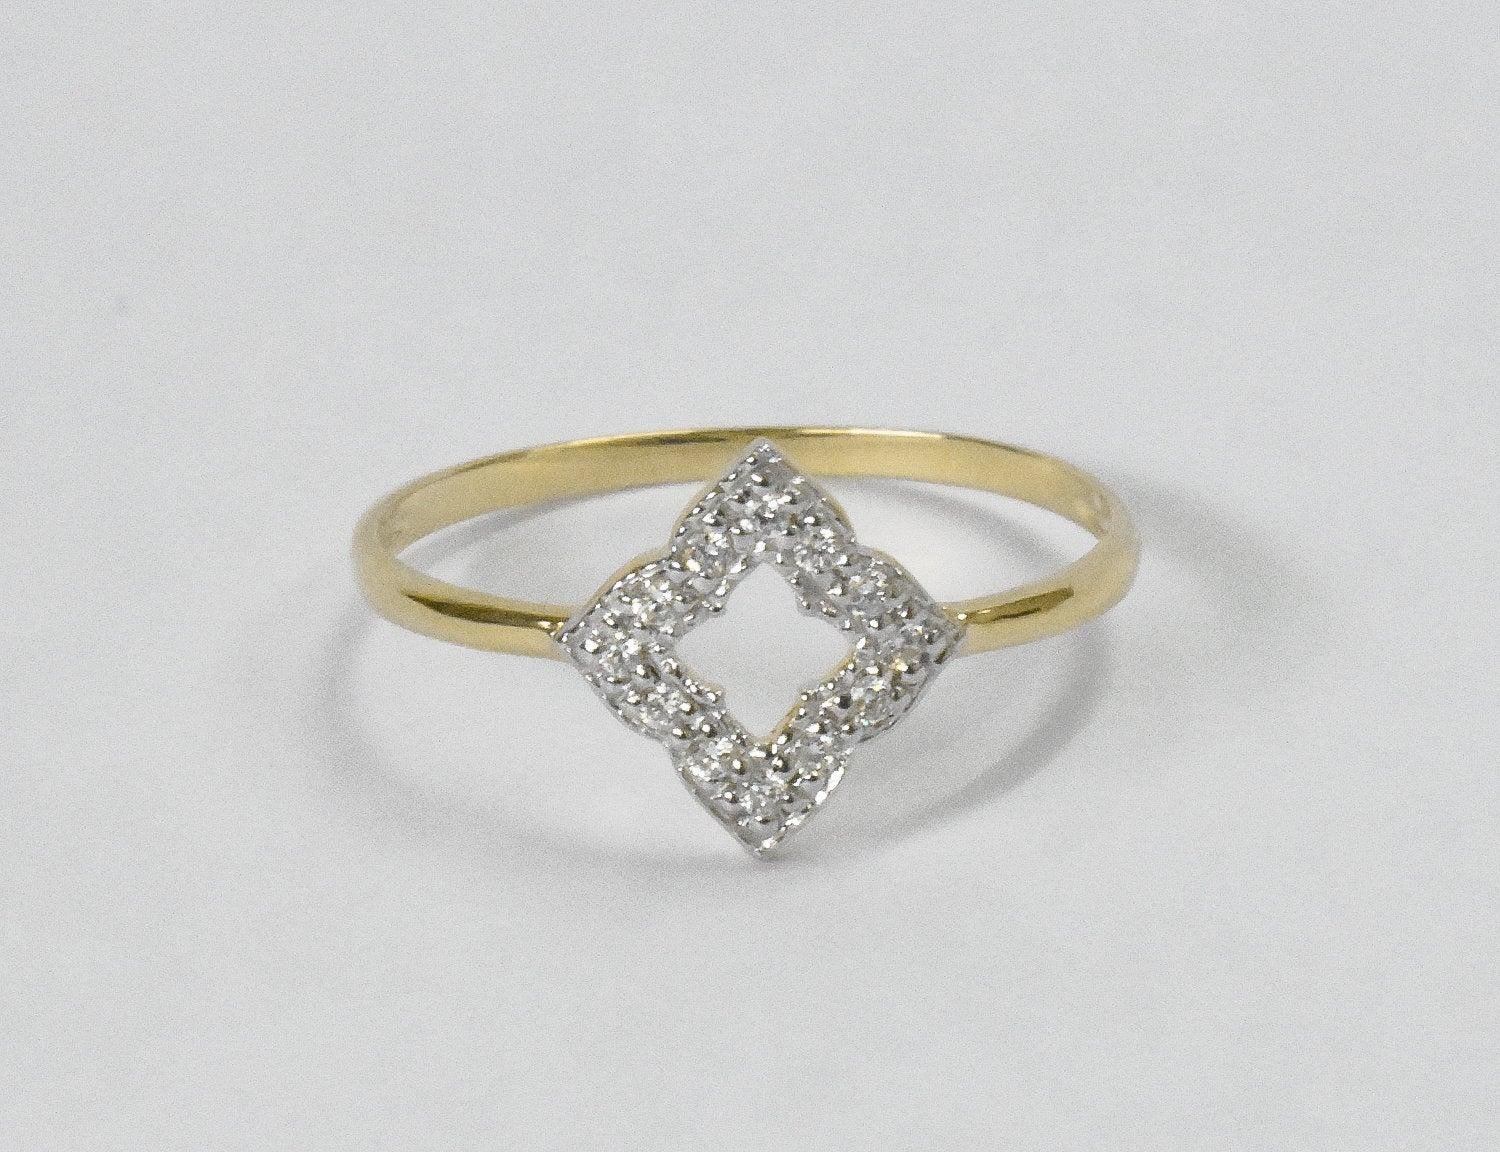 For Sale:  14k Gold Diamond Clover Ring Engagement Ring Stackable Diamond Ring 3